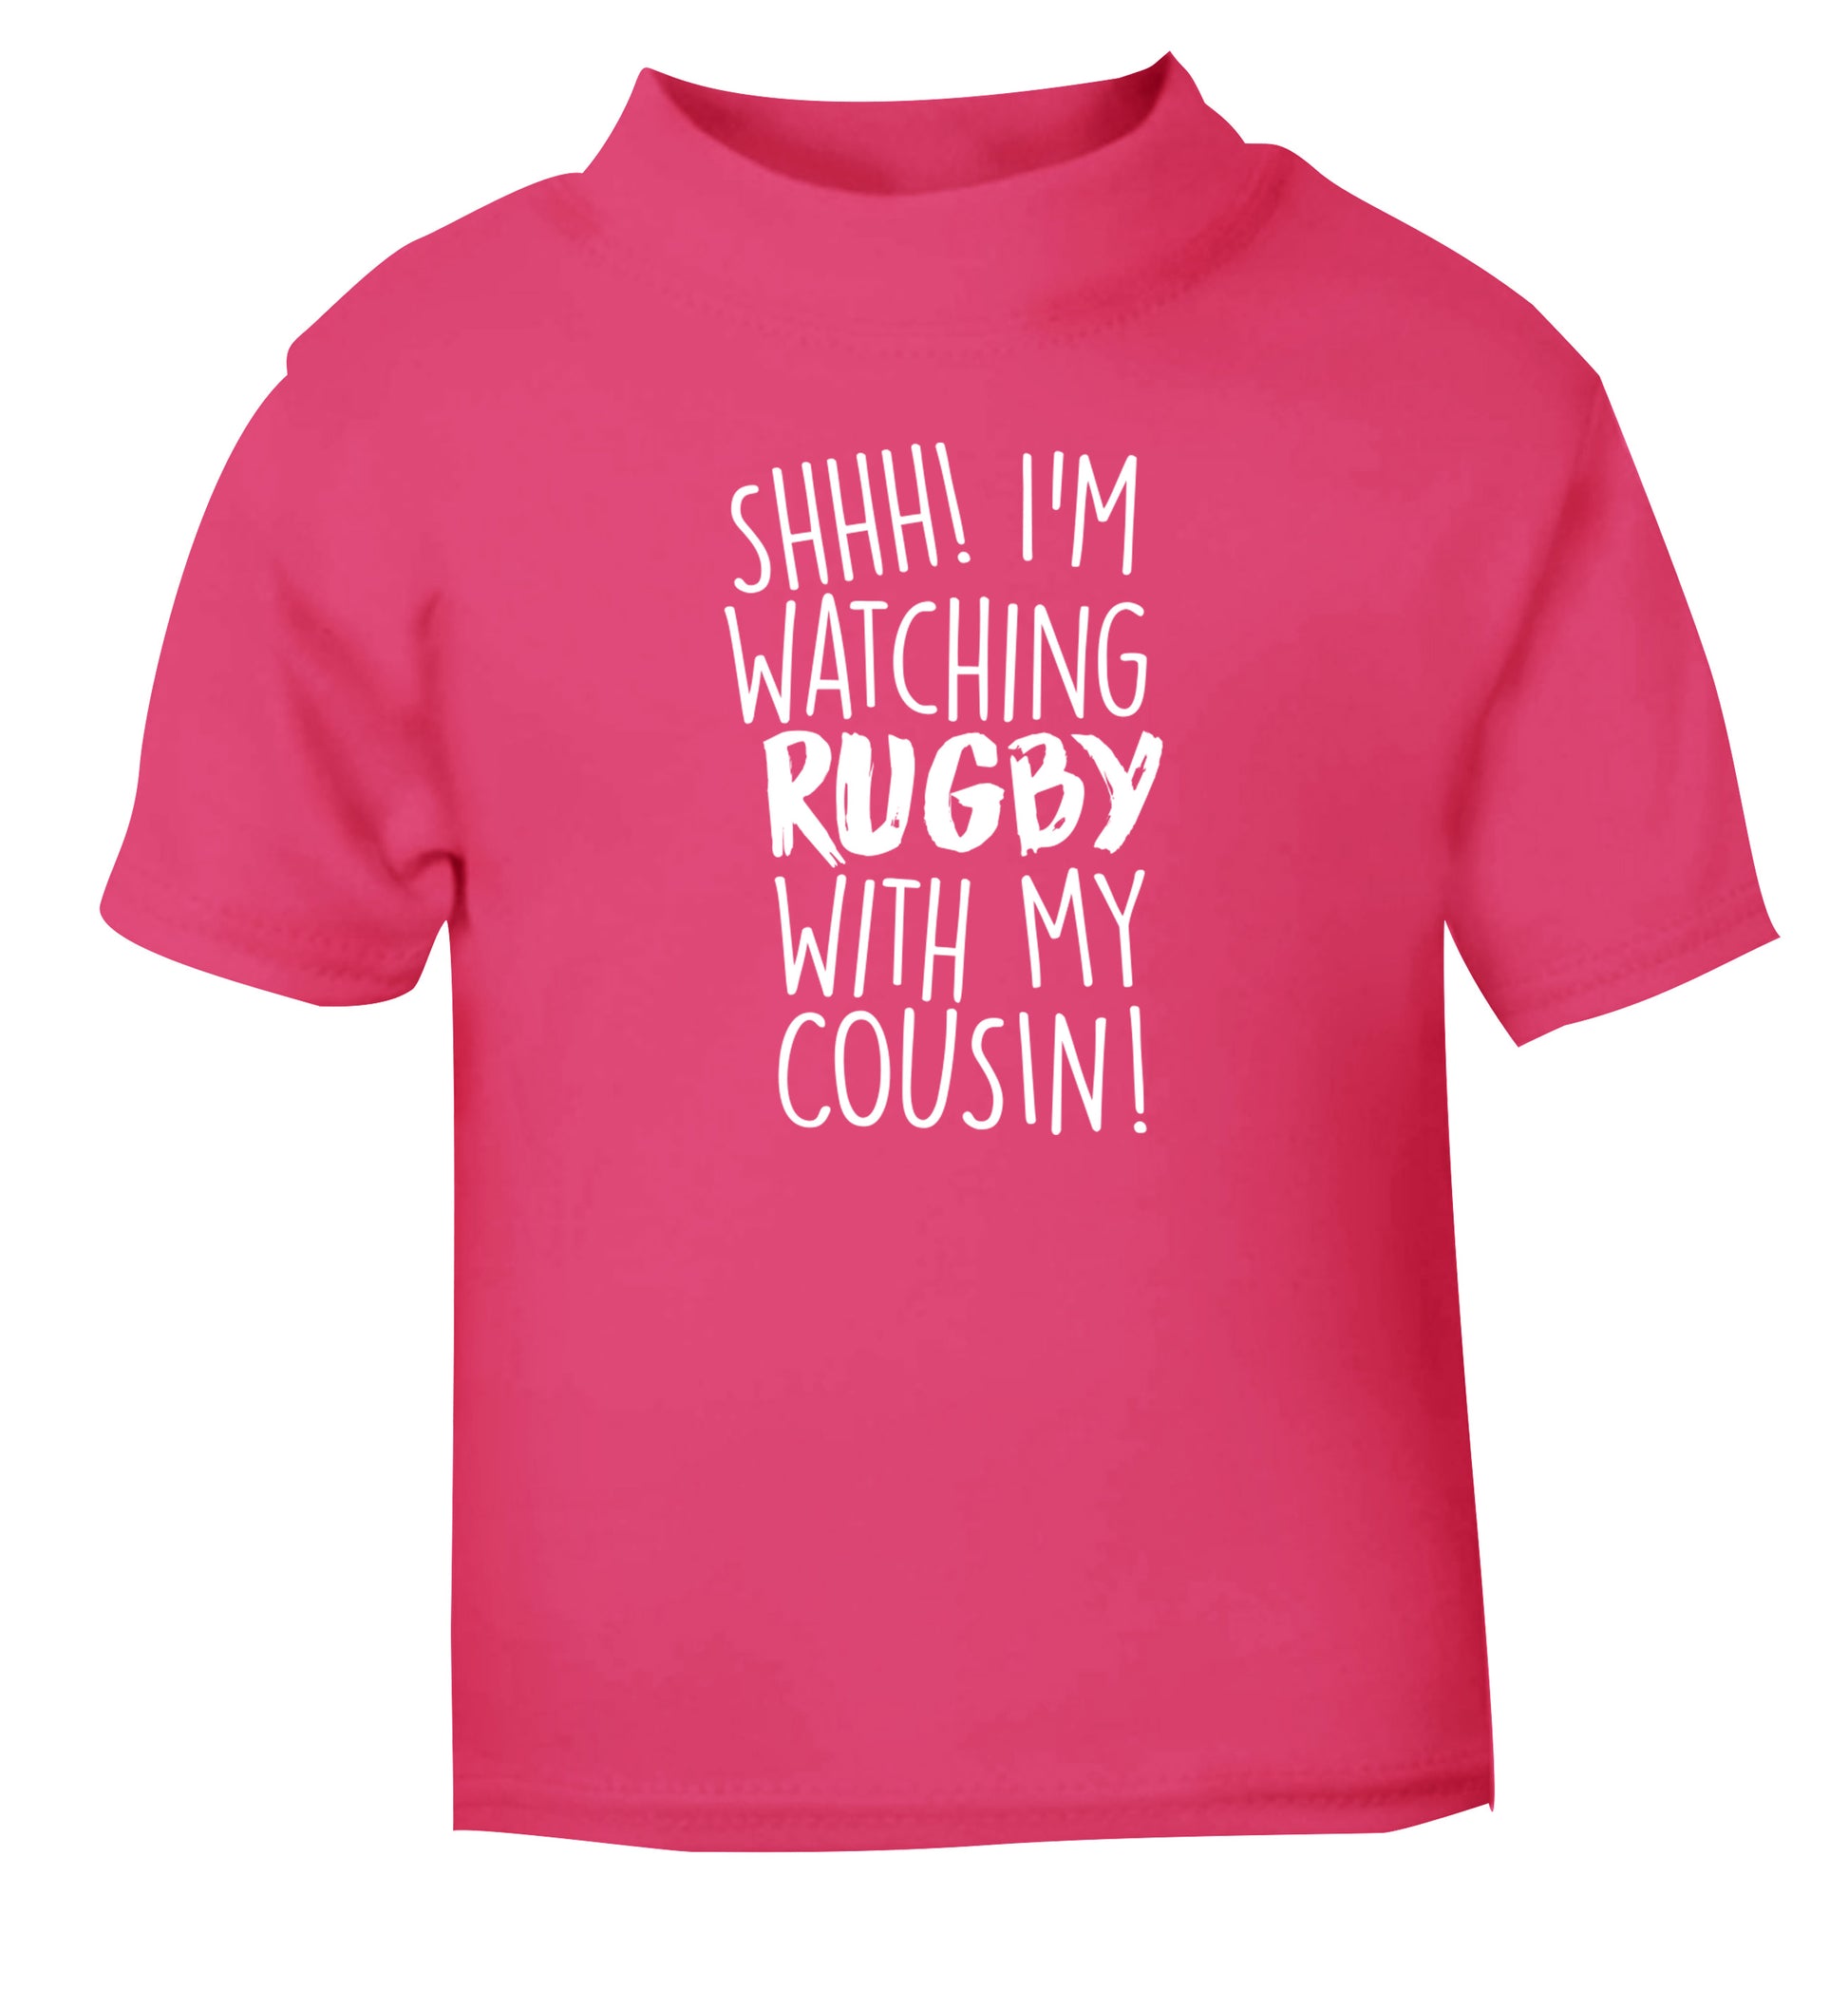 Shhh I'm watching rugby with my cousin pink Baby Toddler Tshirt 2 Years